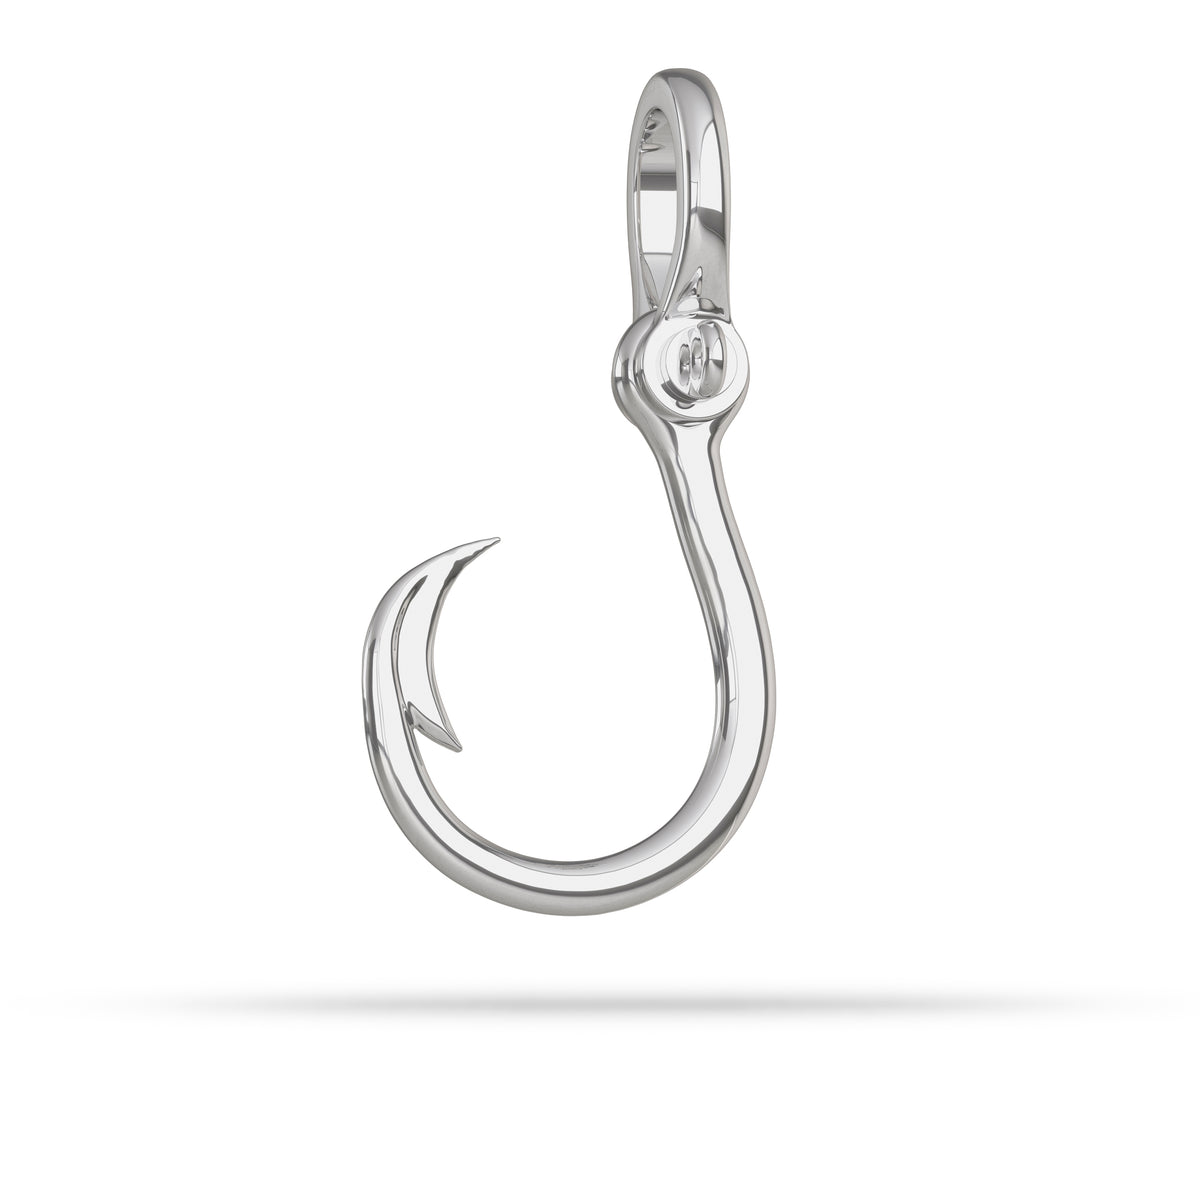 Small Silver fishing hook pendant with Shackle Bail 